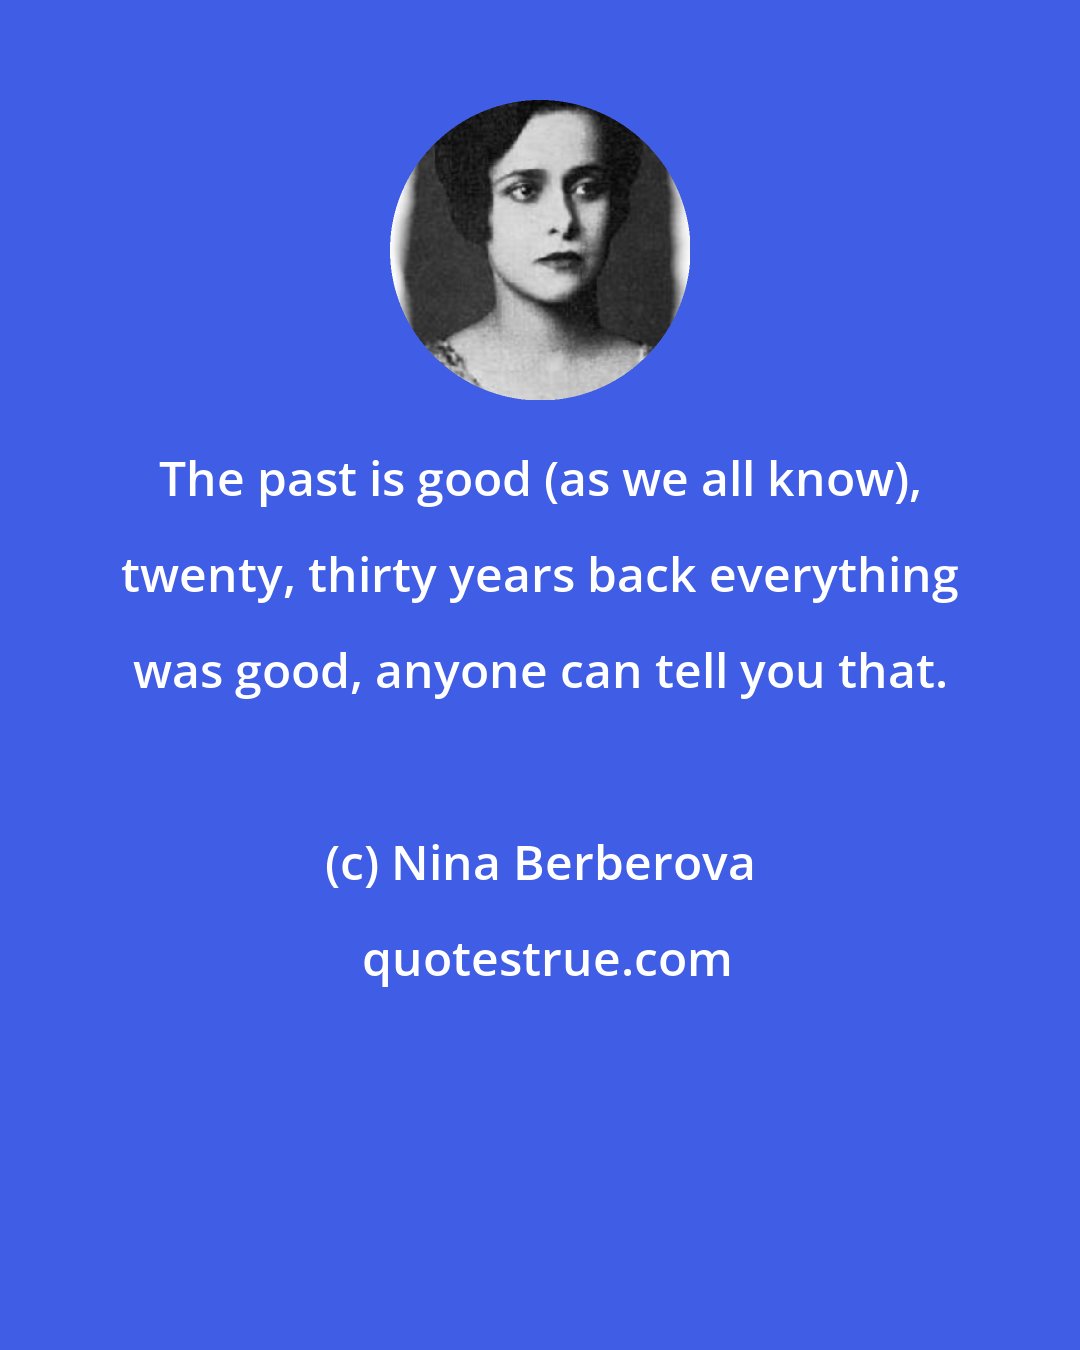 Nina Berberova: The past is good (as we all know), twenty, thirty years back everything was good, anyone can tell you that.